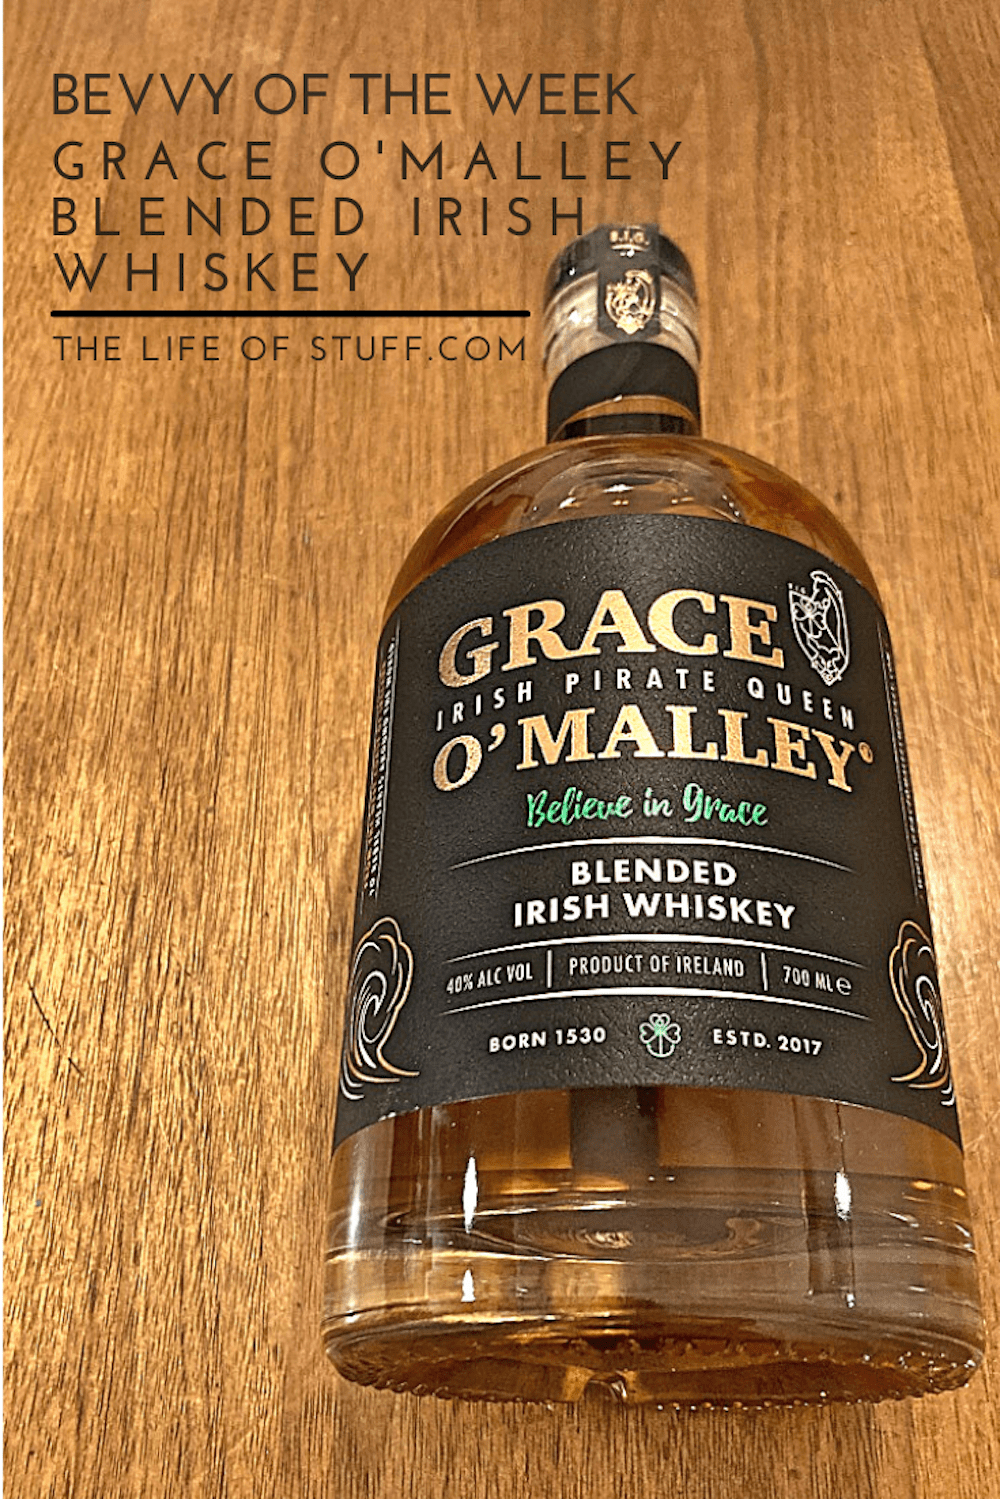 Bevvy of the Week - Grace O'Malley Blended Irish Whiskey - The Life of Stuff